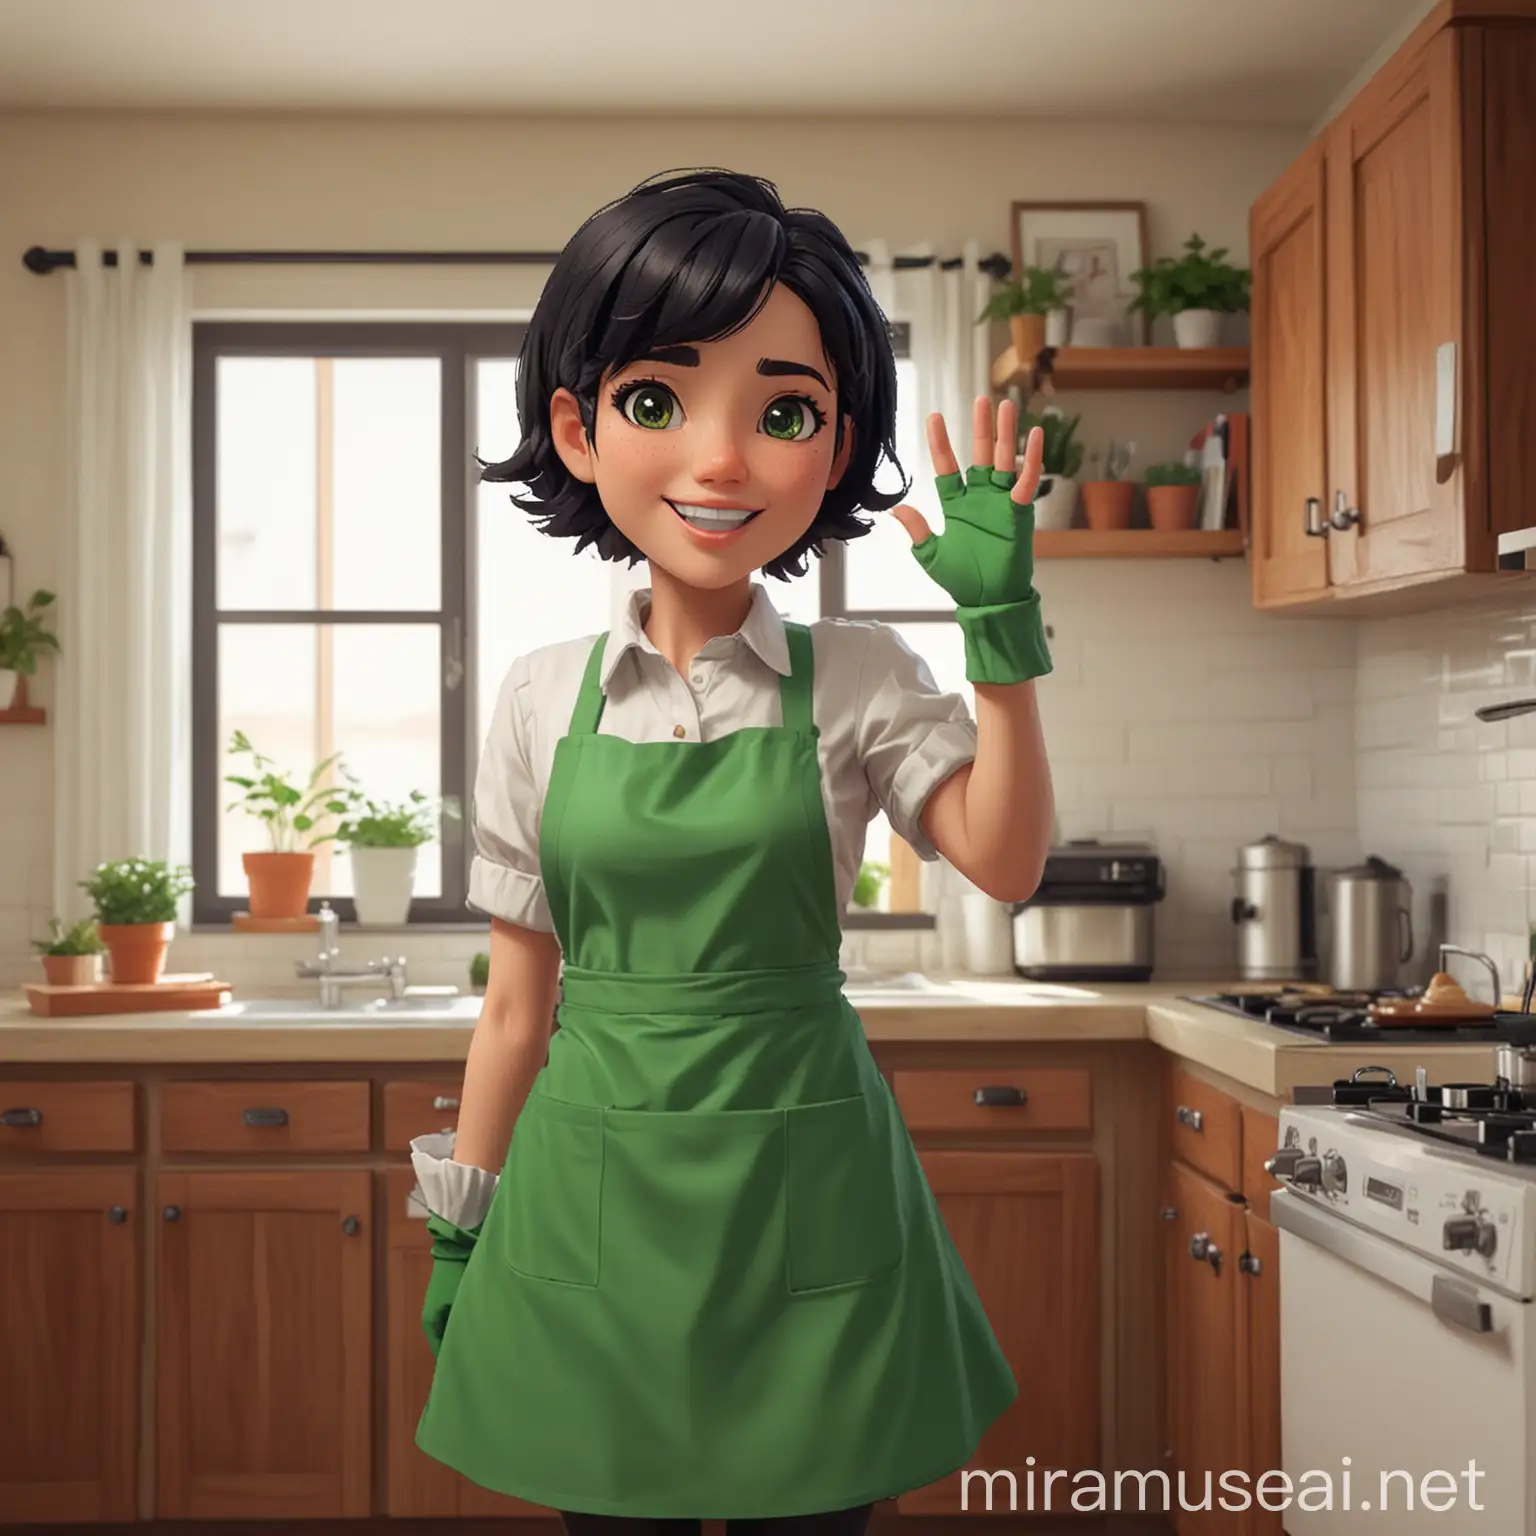 Cheerful Pixel Animation Housekeeper Waving in Bright Apartment